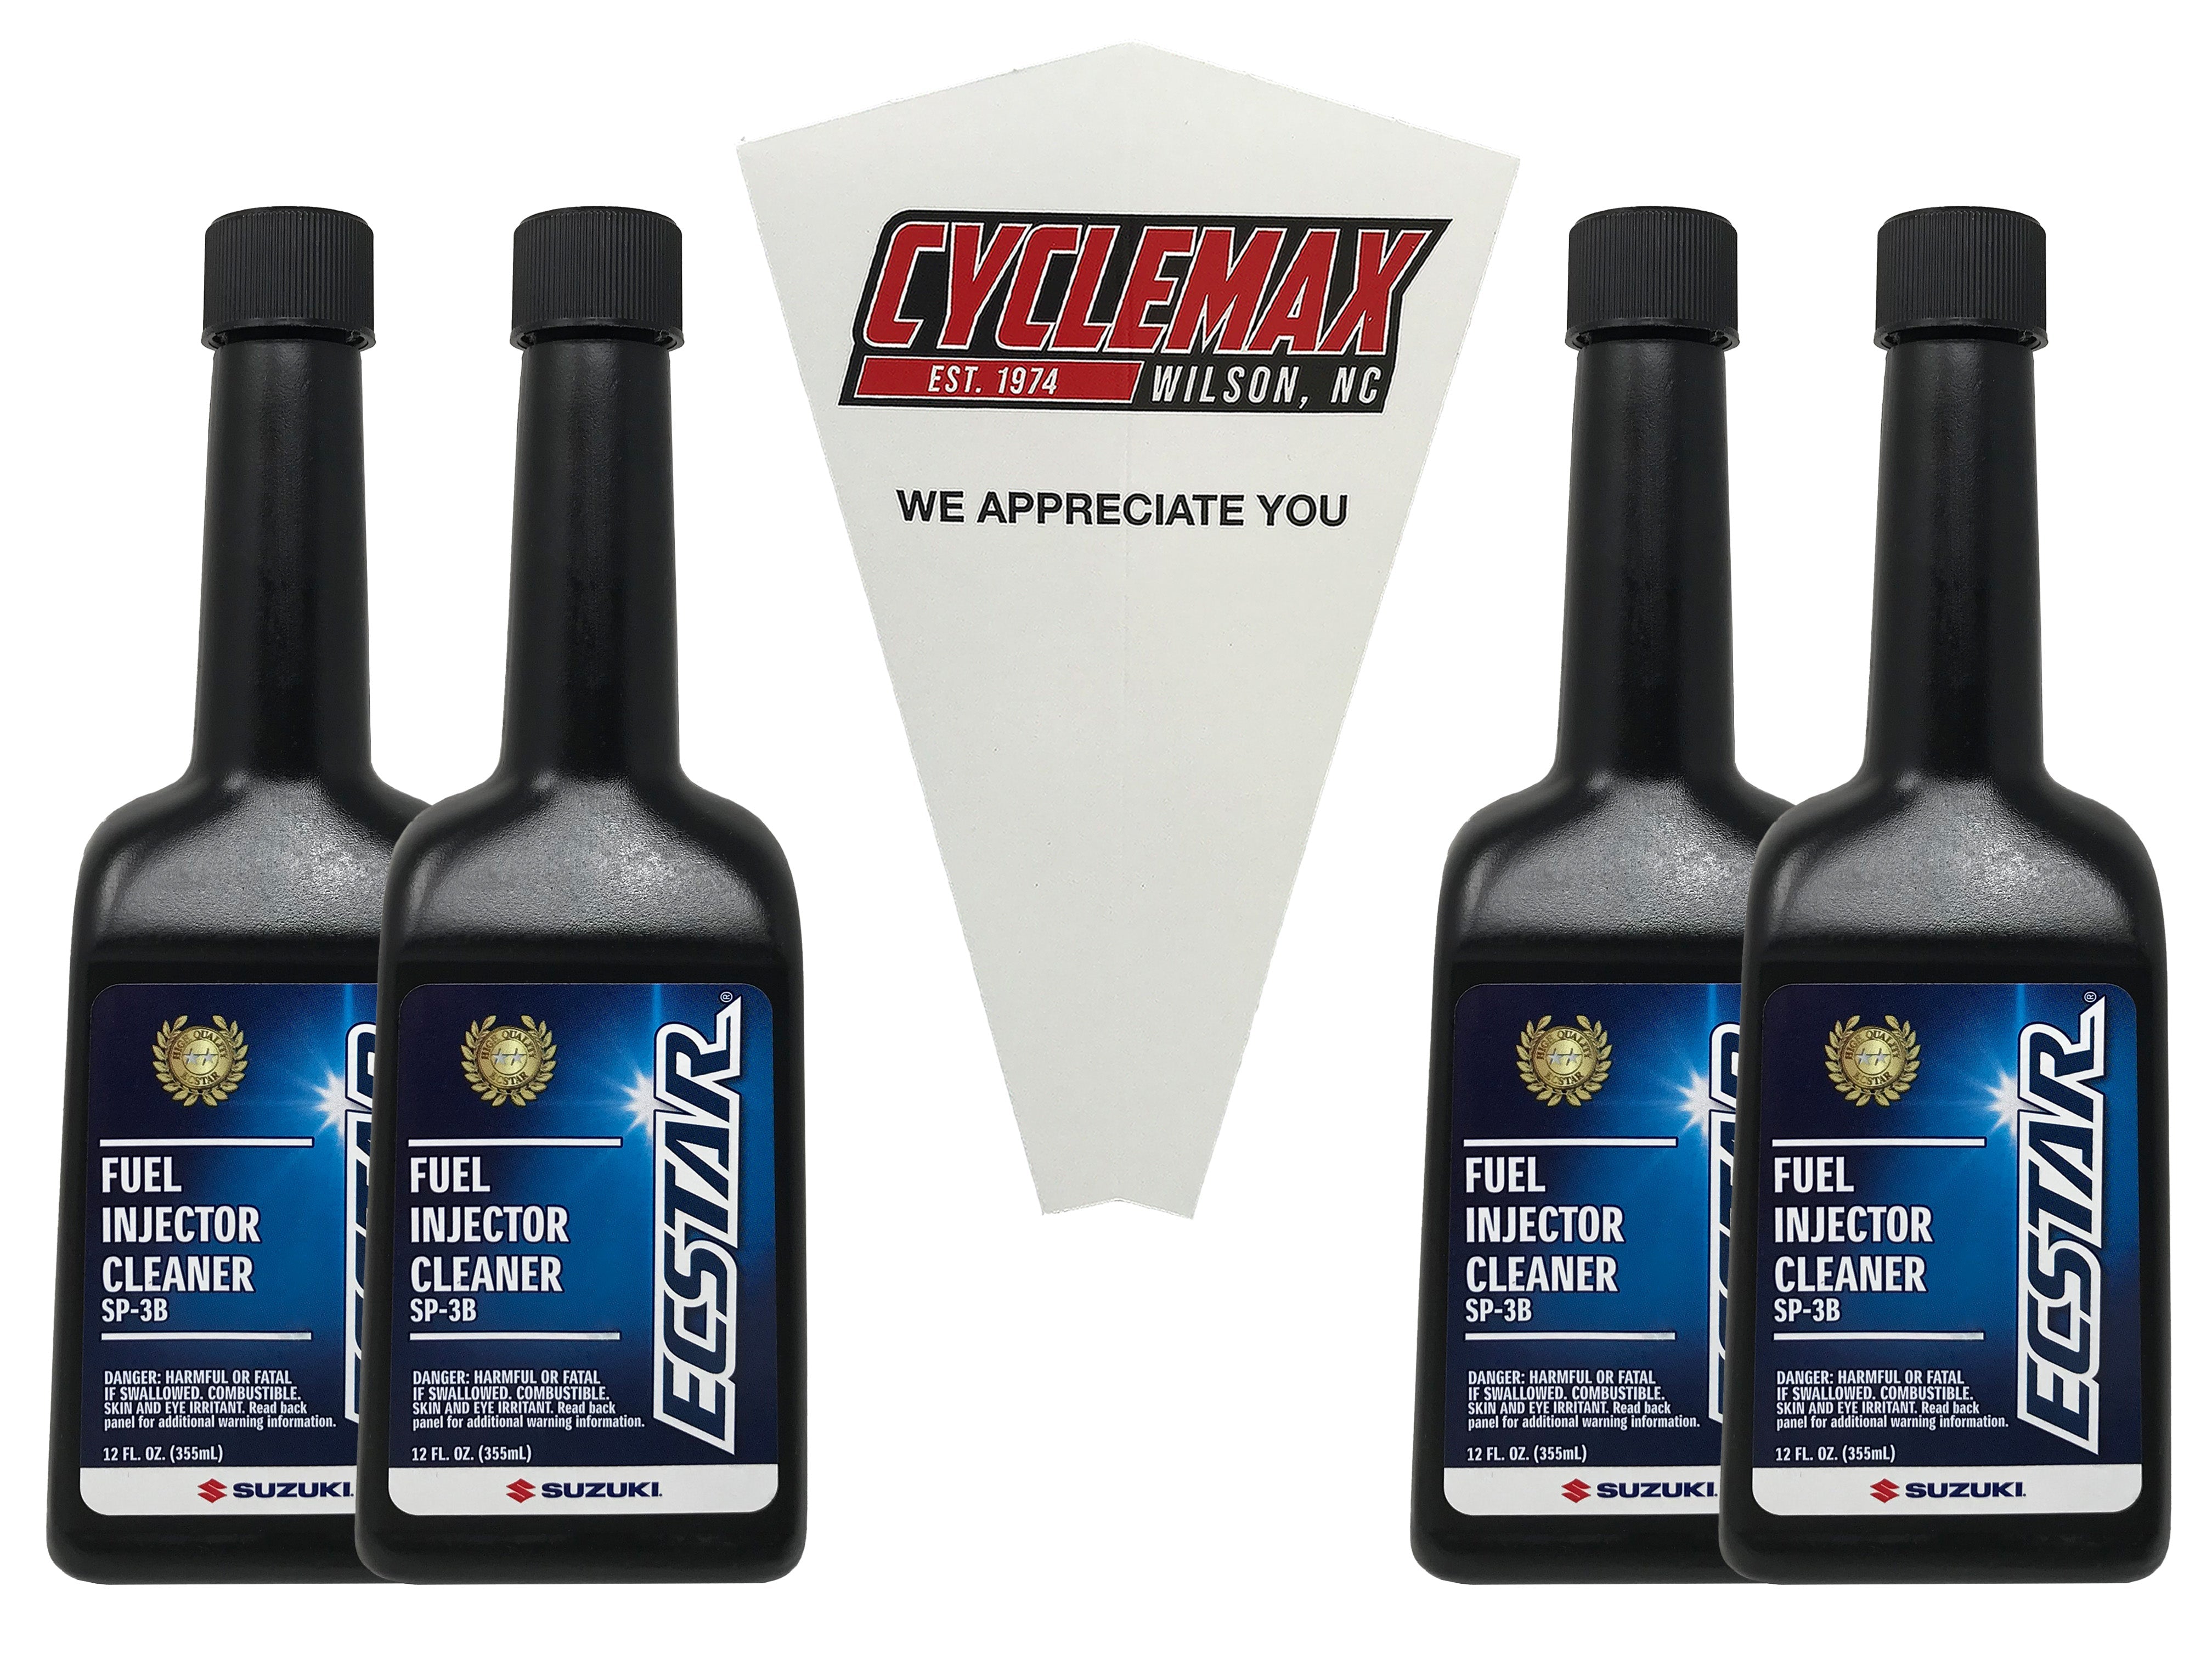 CYCLEMAX Four Pack for Suzuki Ecstar Fuel Injector Cleaner 990A0-02E25-12Z Contains Four 12oz Cans and a Funnel